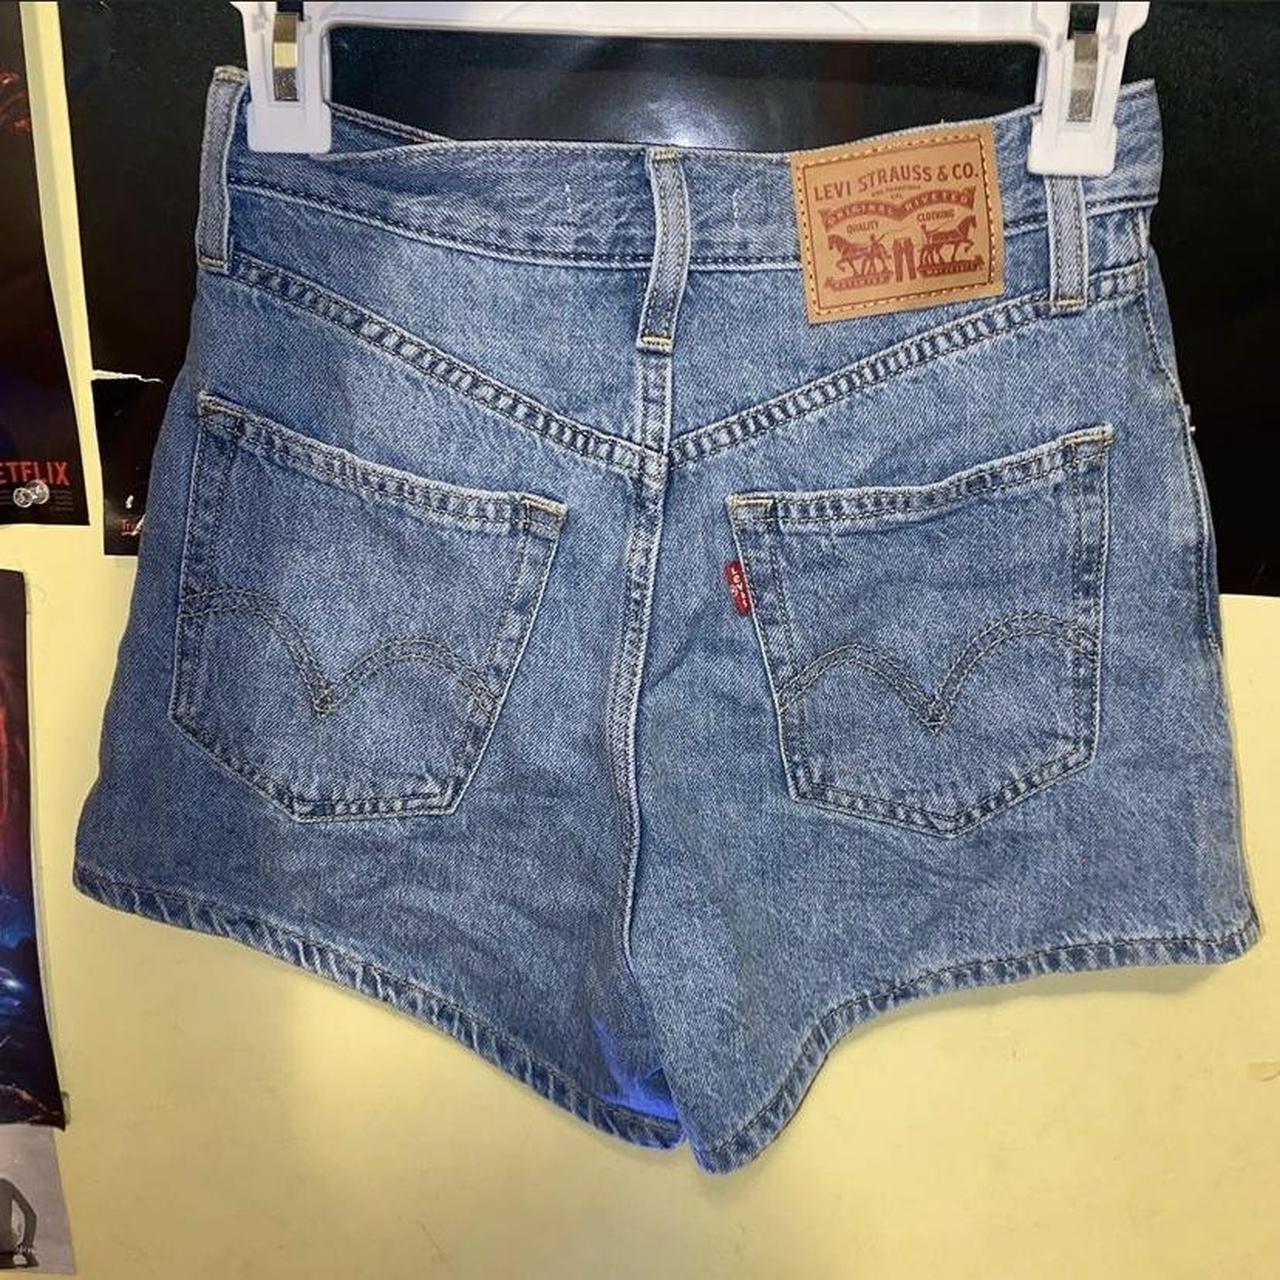 Levis High Waisted Mom Shorts in Black So sad that - Depop